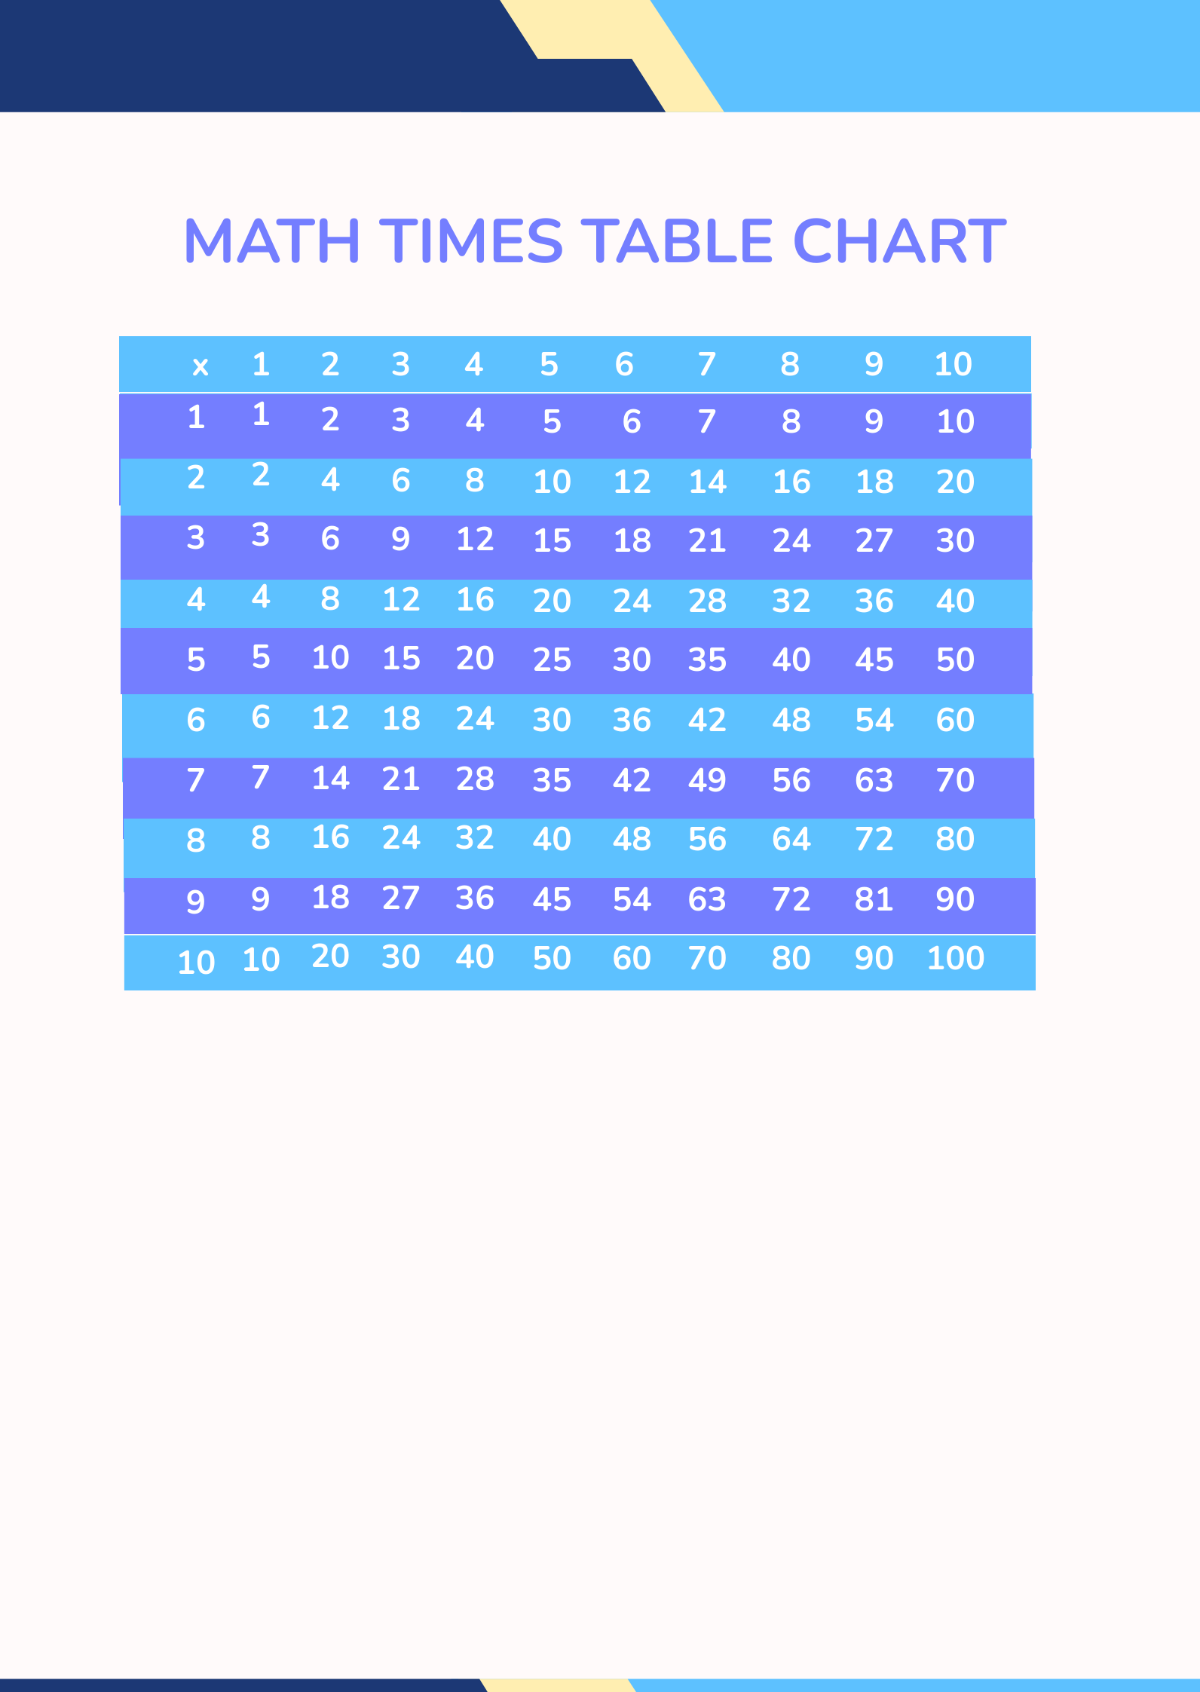 Math Times Table Chart Template